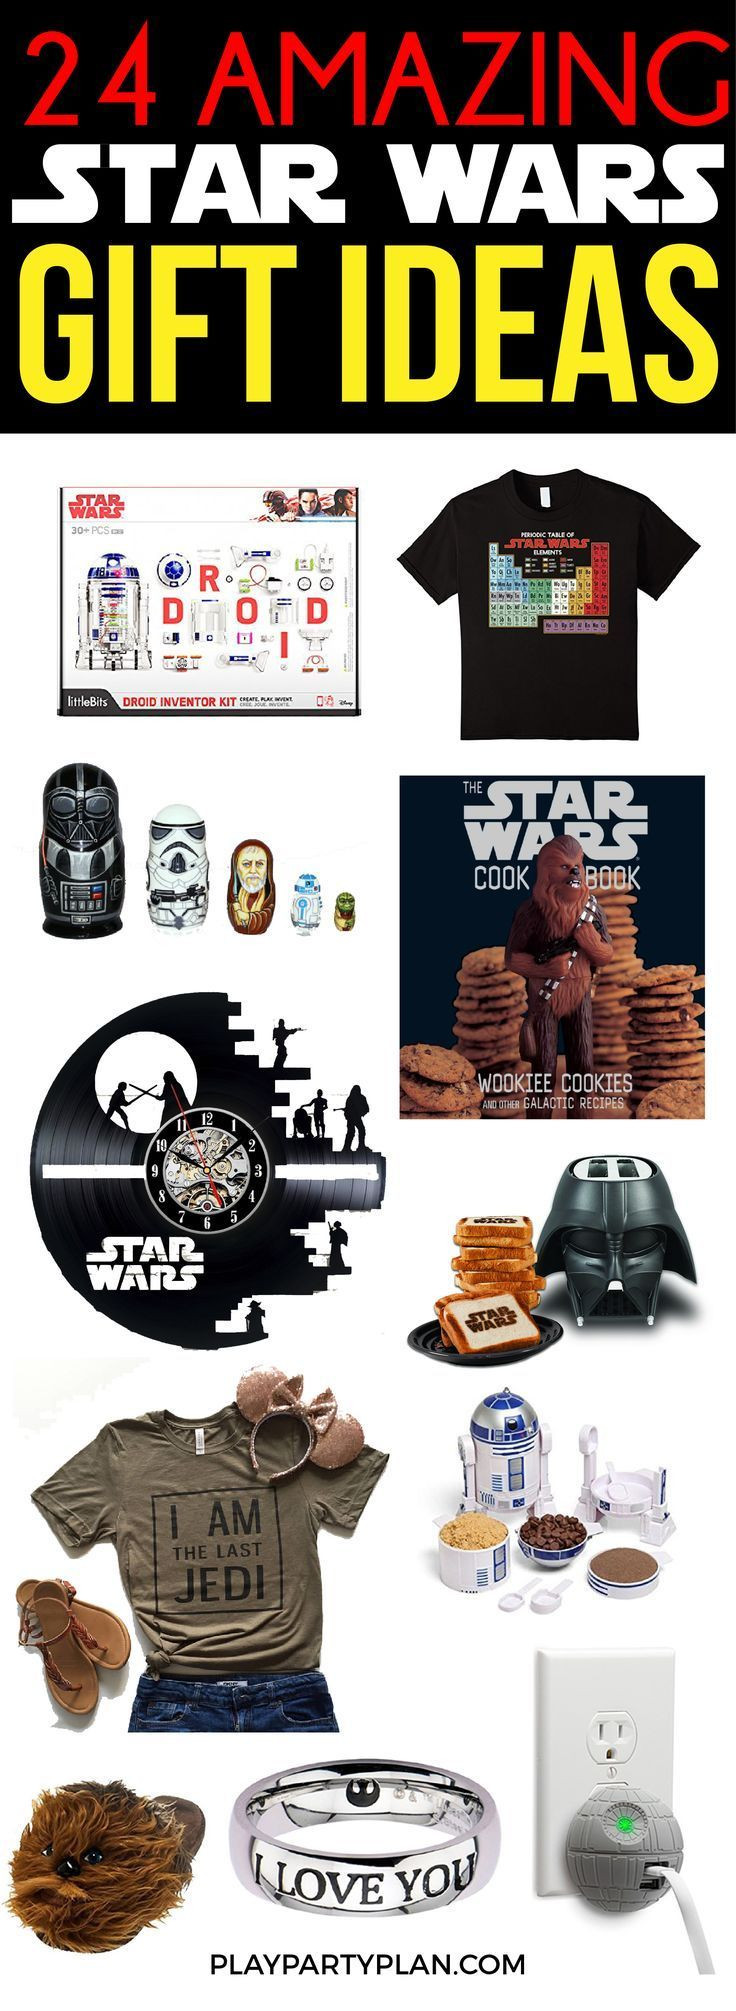 Best Star Wars Gifts For Kids
 The best Star Wars ts ever Gift ideas for her for her